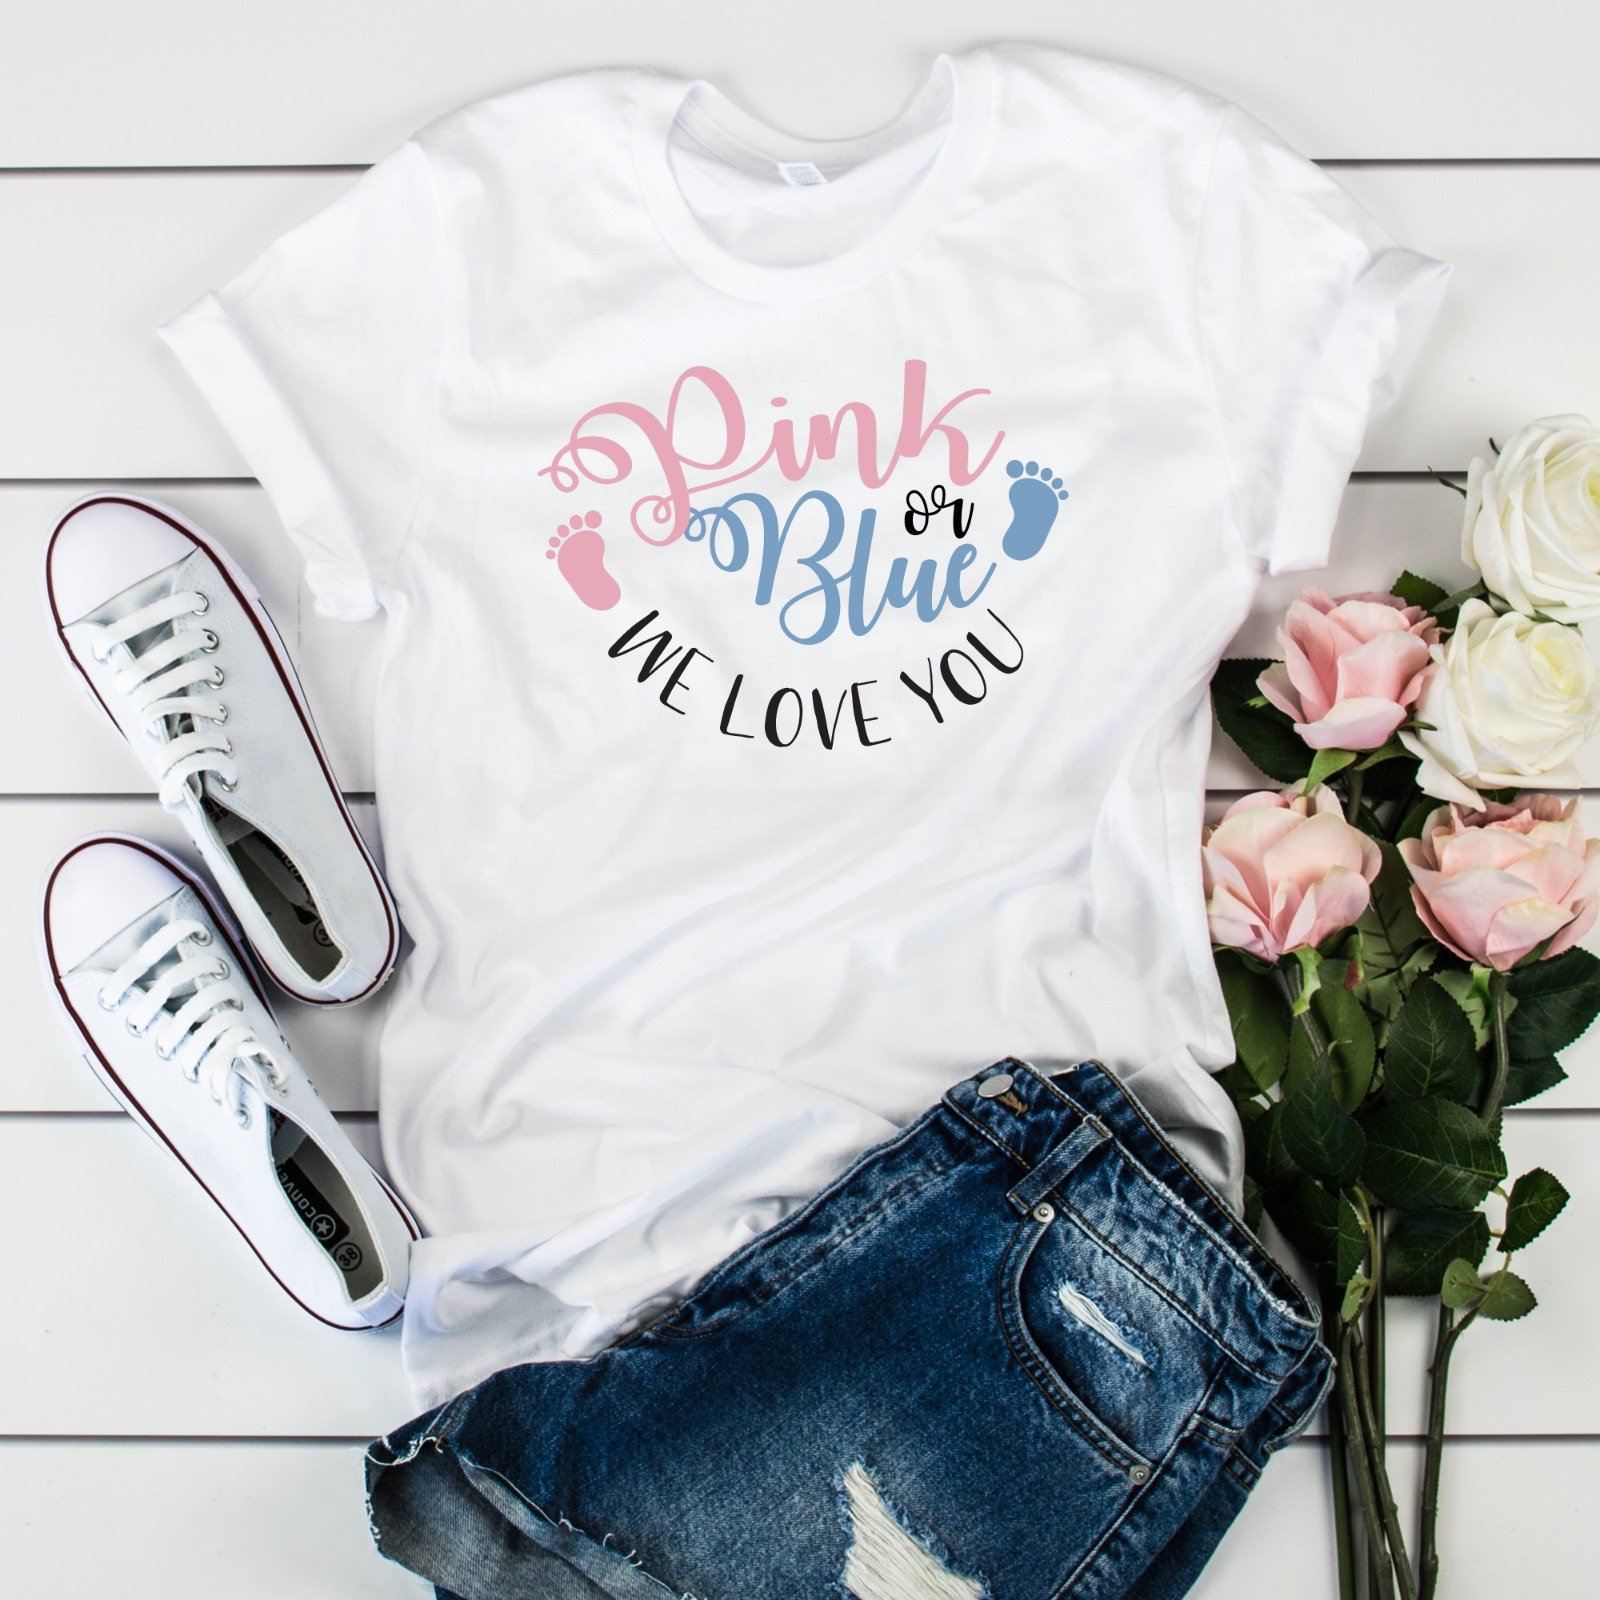 Pink or Blue we love you t-shirt, Gender reveal party shirt, Baby Shower